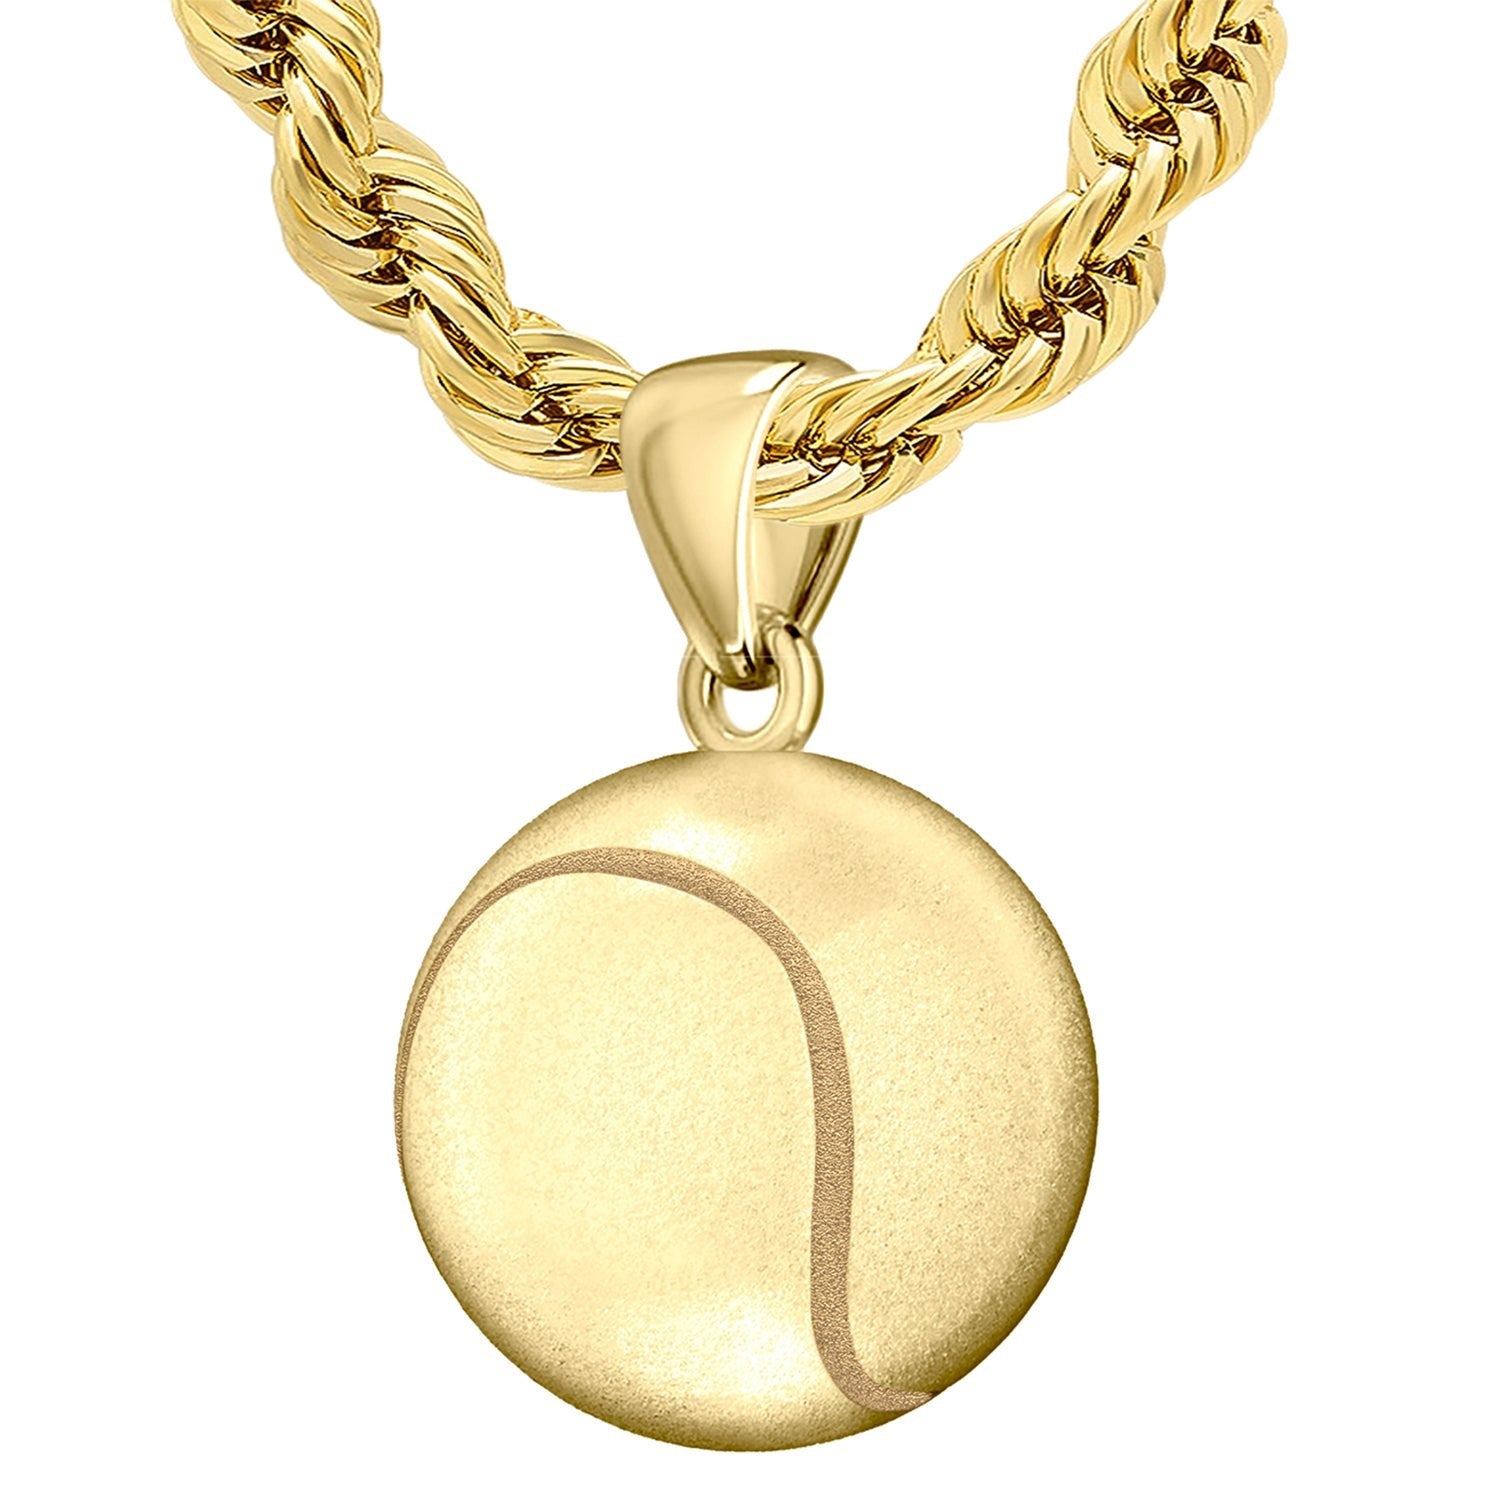 Large 10K or 14K Yellow Gold 3D Tennis Ball Pendant Necklace, 18.5mm - US Jewels